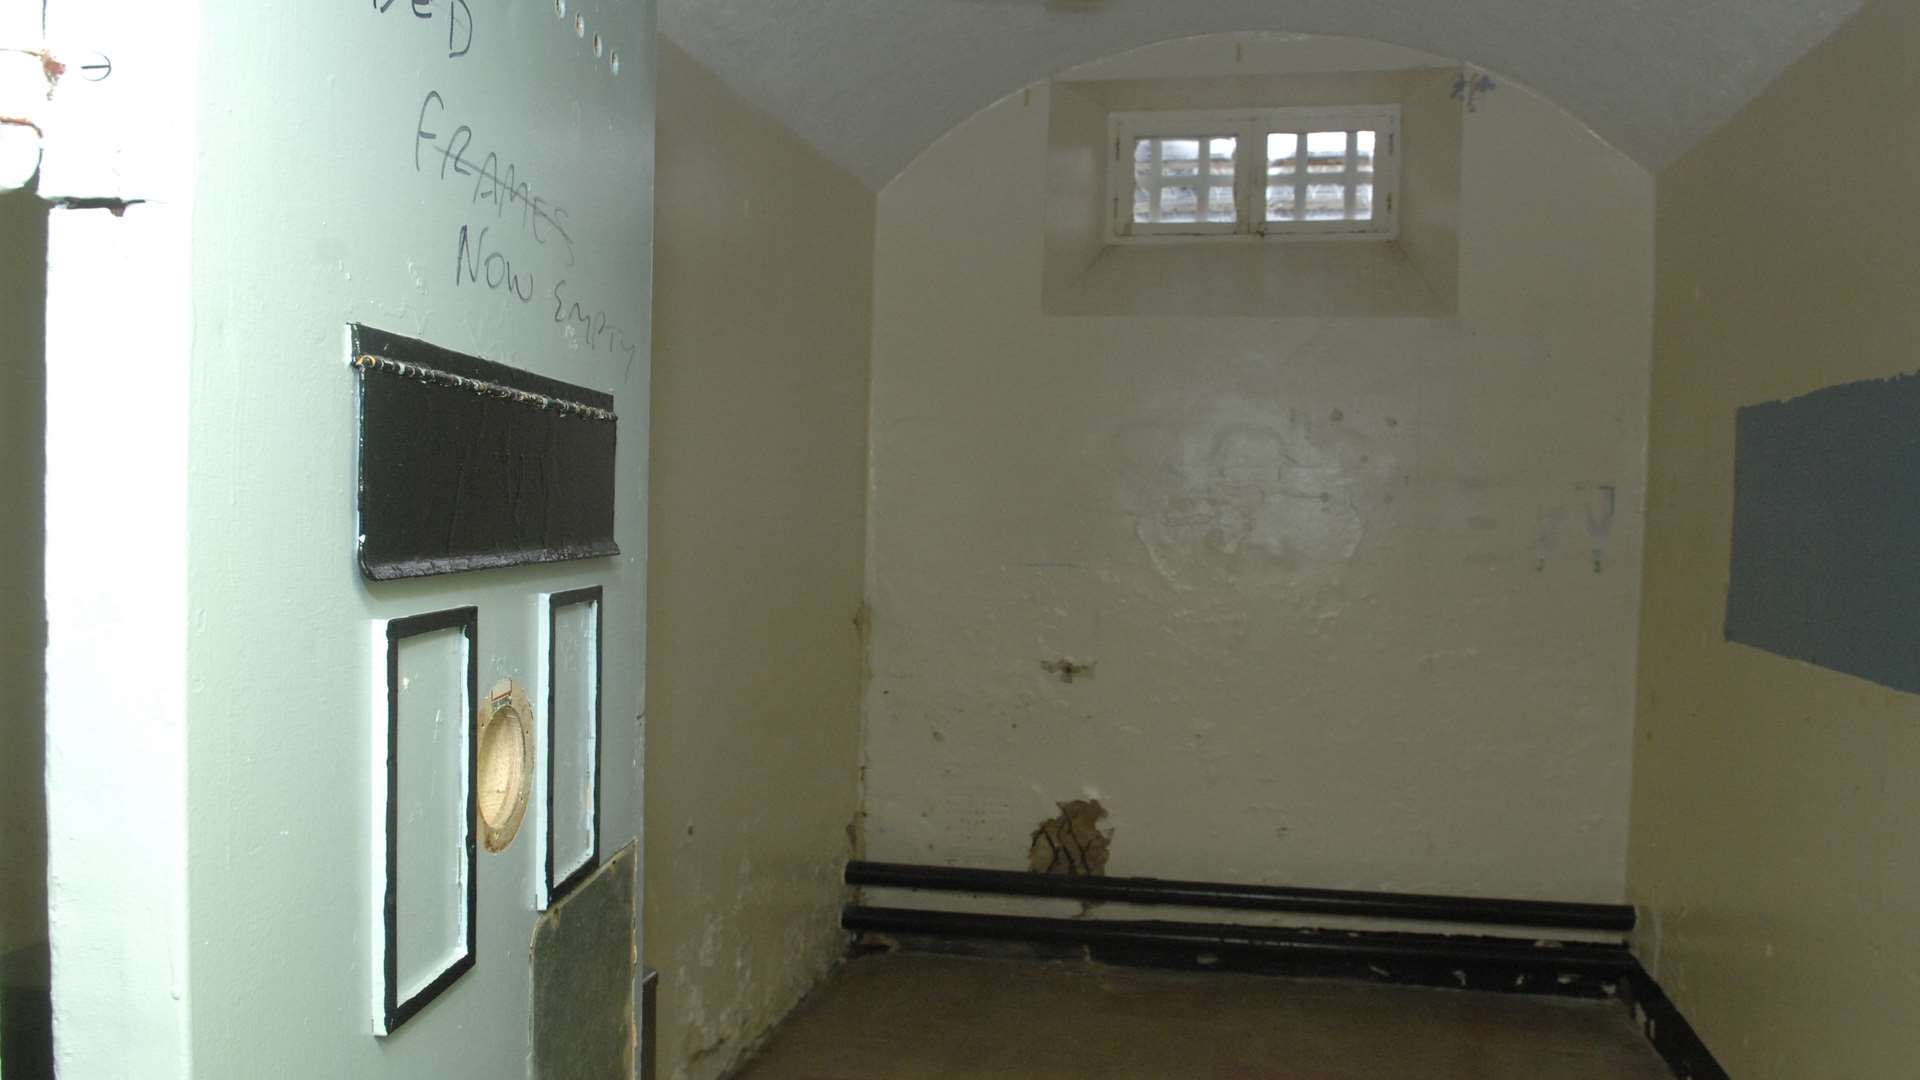 The prison cells will be turned into rooms for students